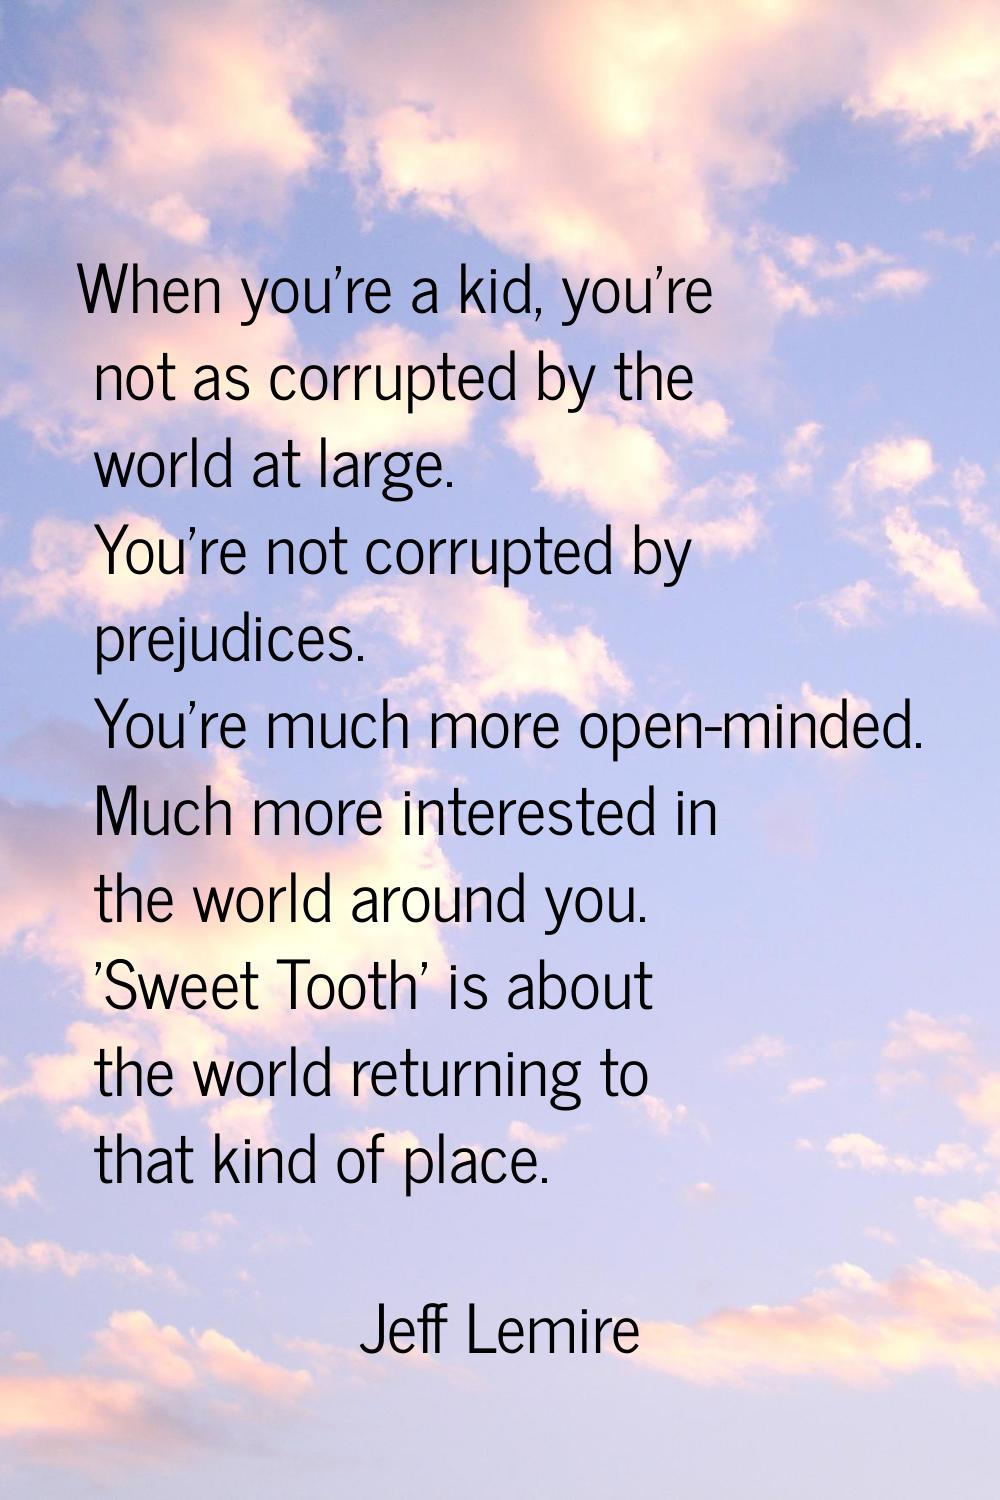 When you're a kid, you're not as corrupted by the world at large. You're not corrupted by prejudice